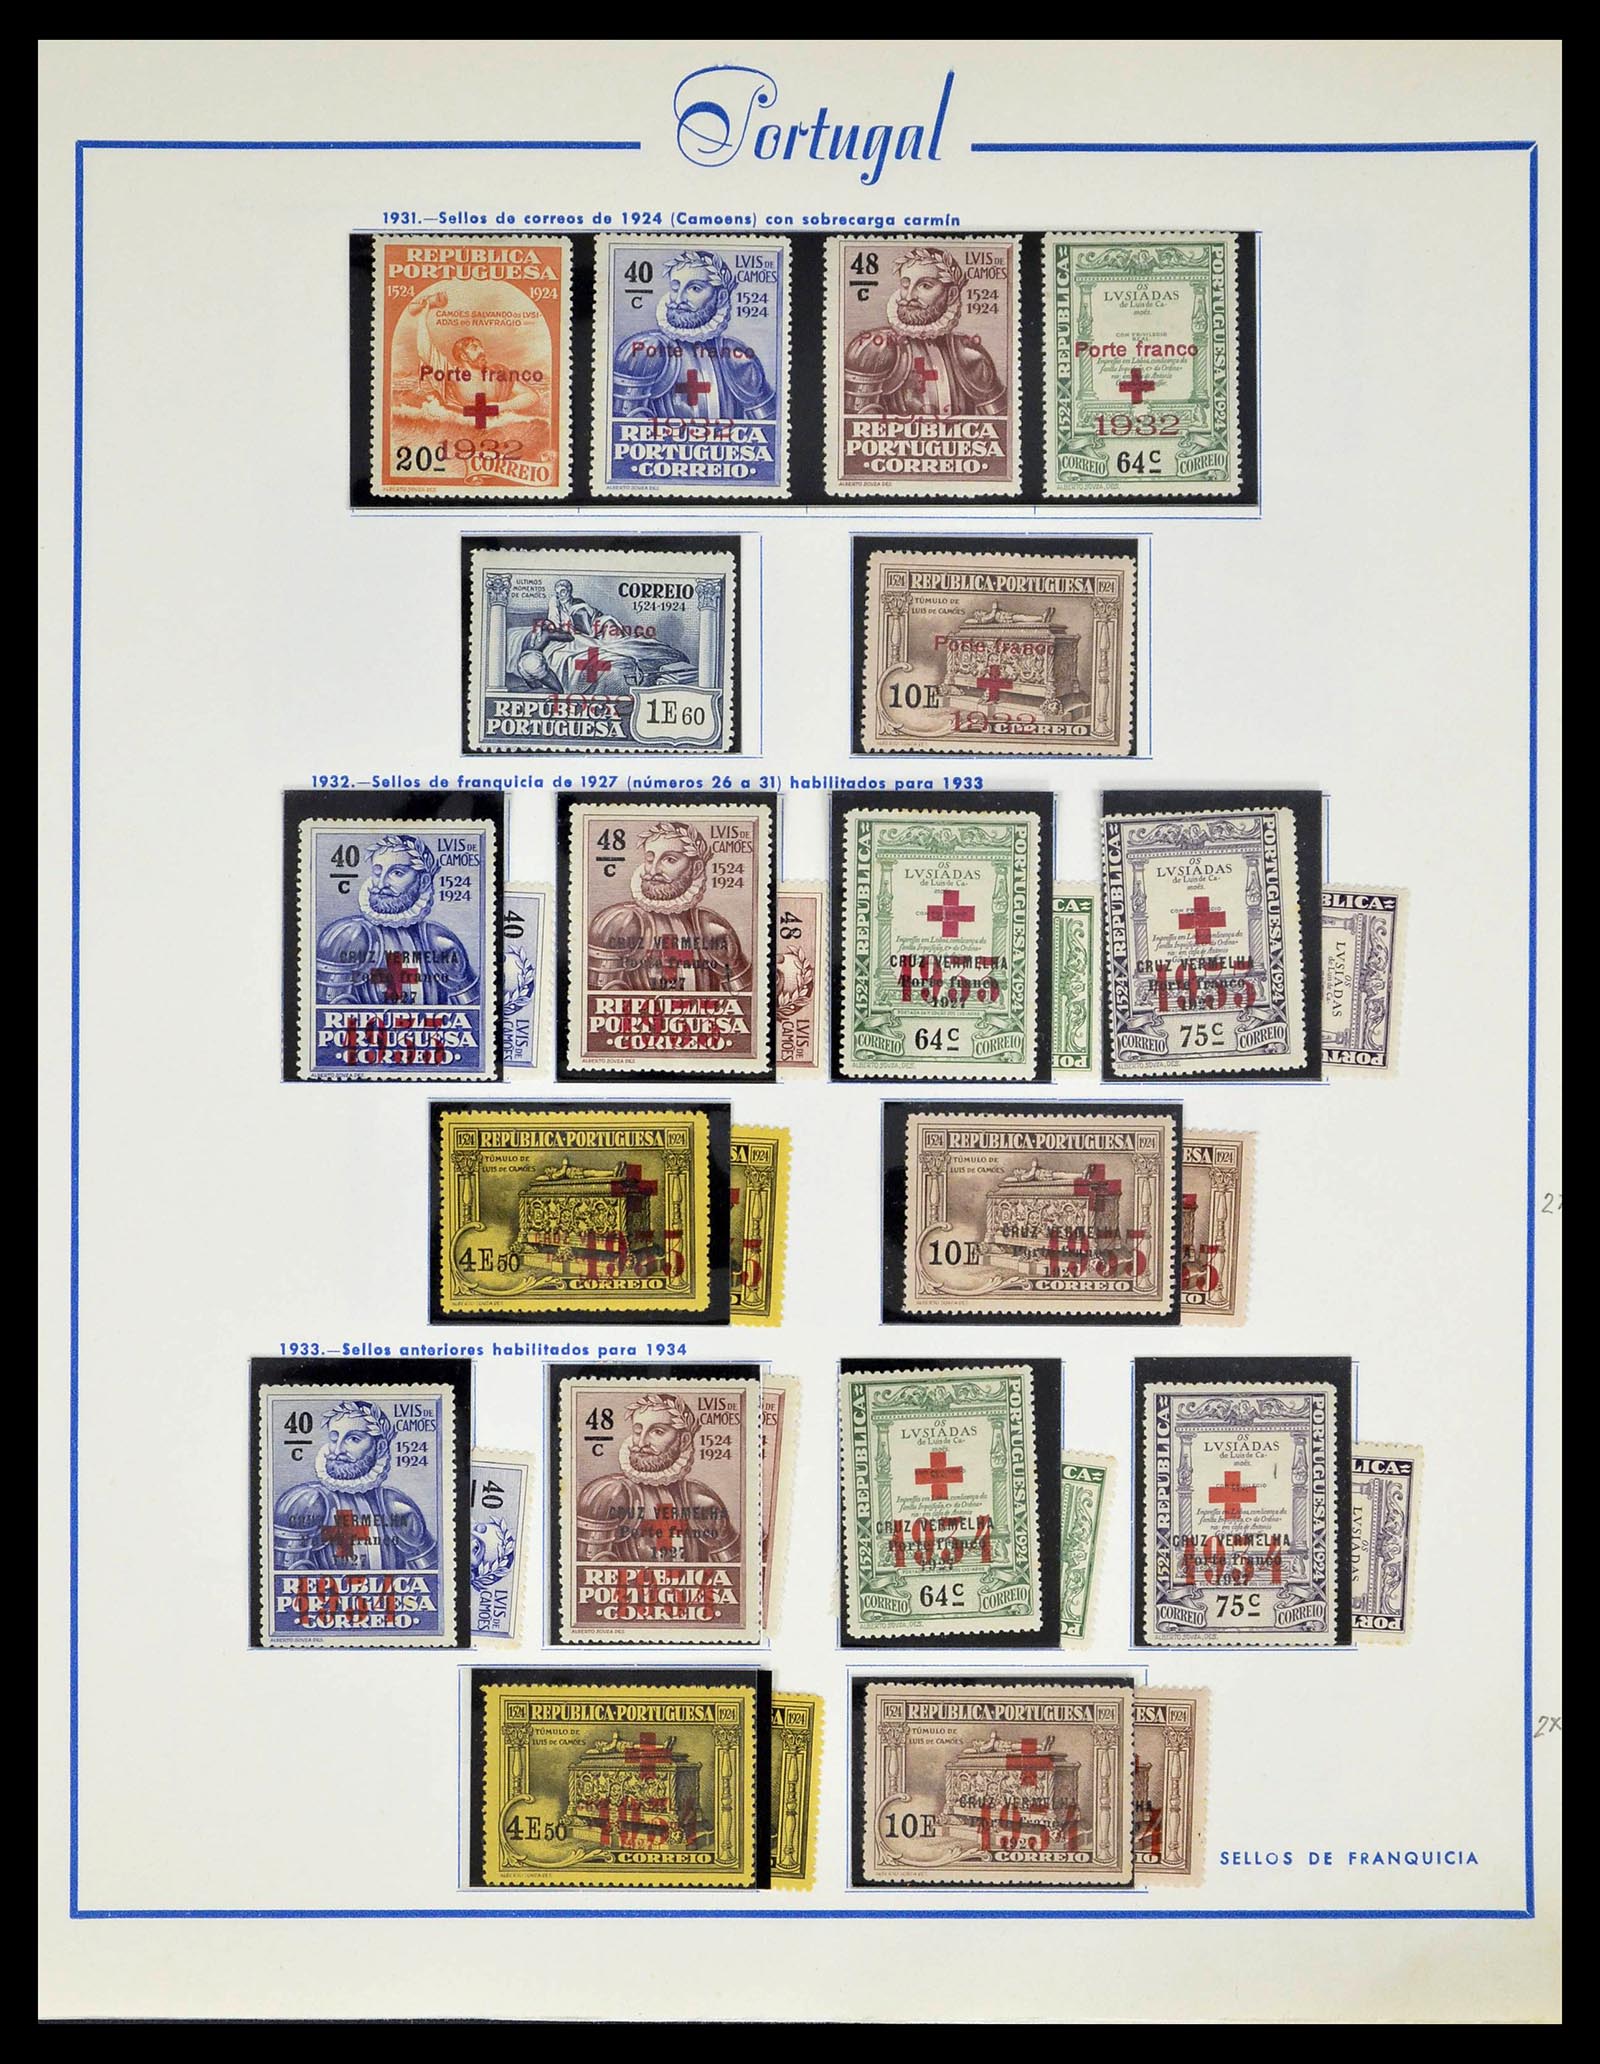 39233 0094 - Stamp collection 39233 Portugal 1853-1978.